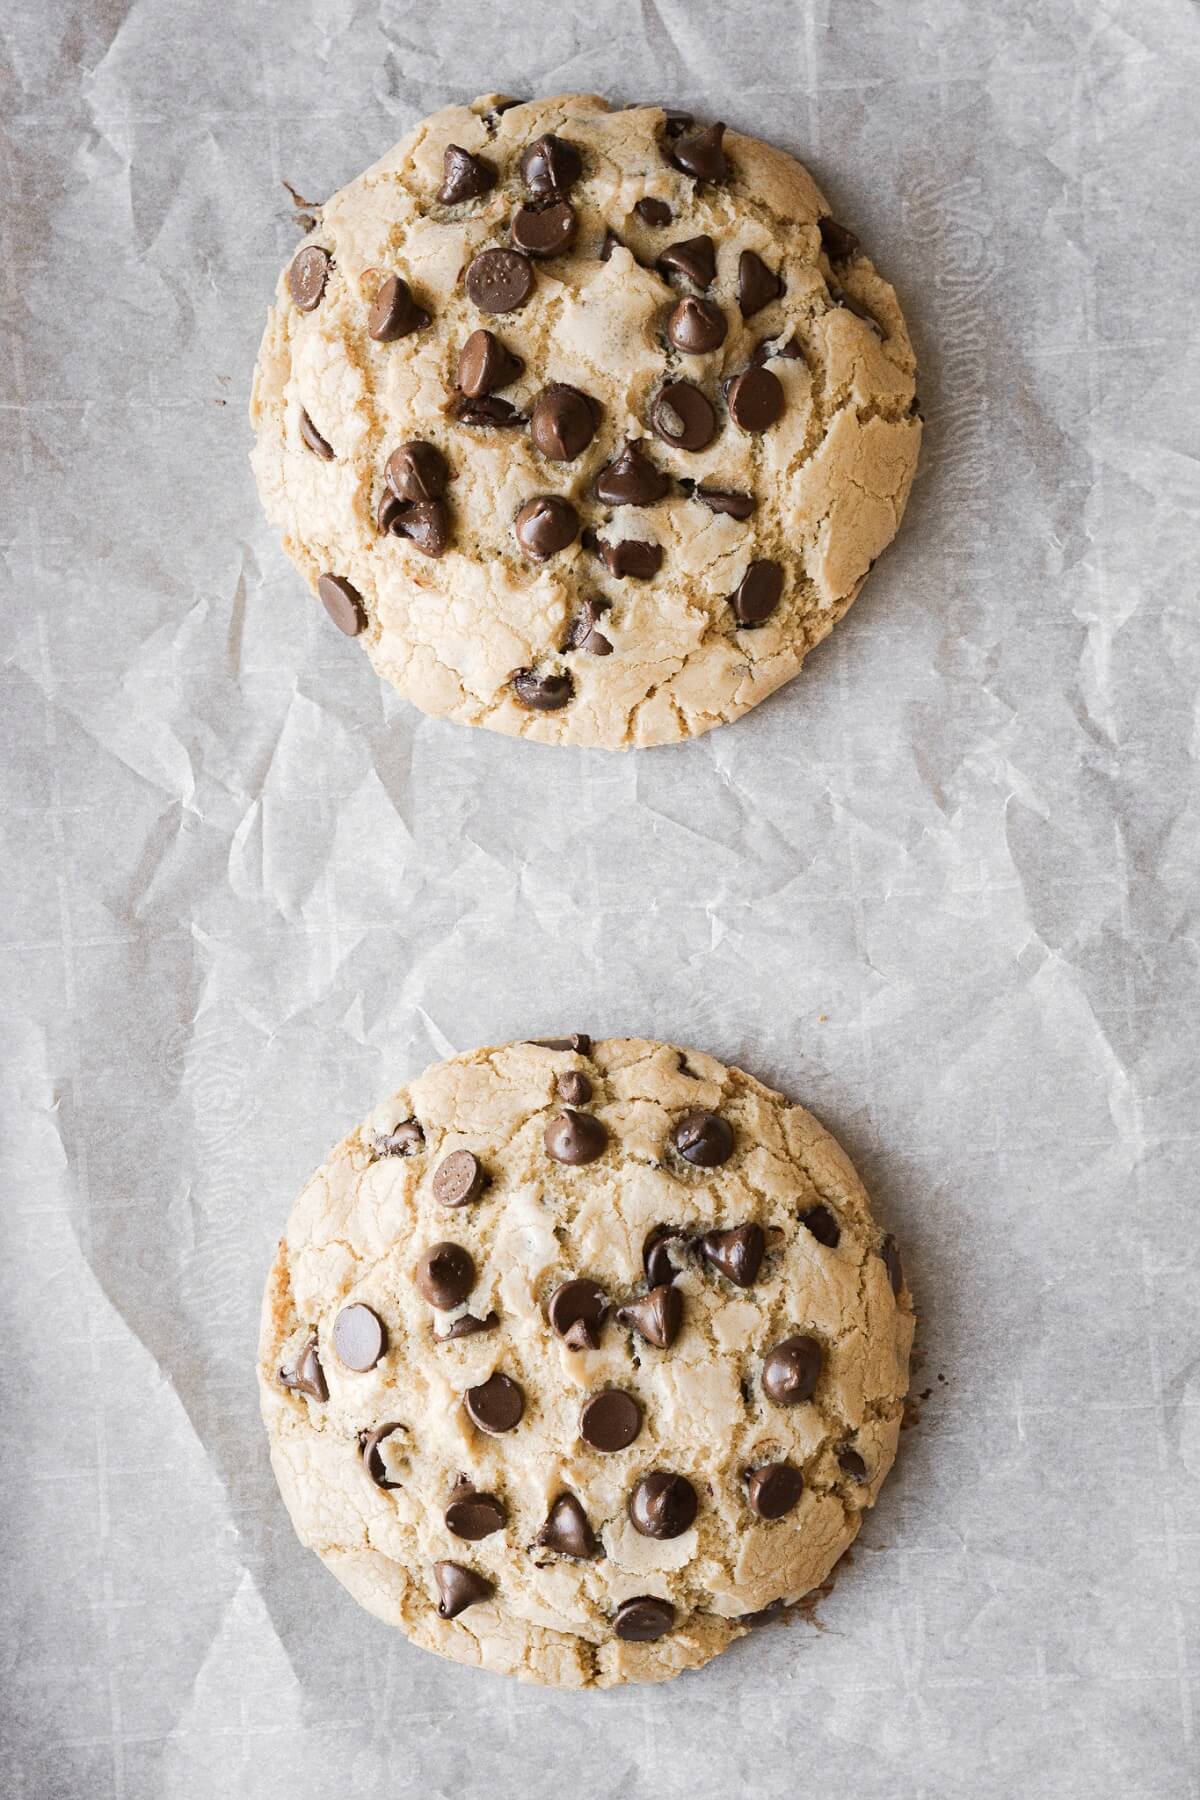 Two big chocolate chip cookies on parchment paper.